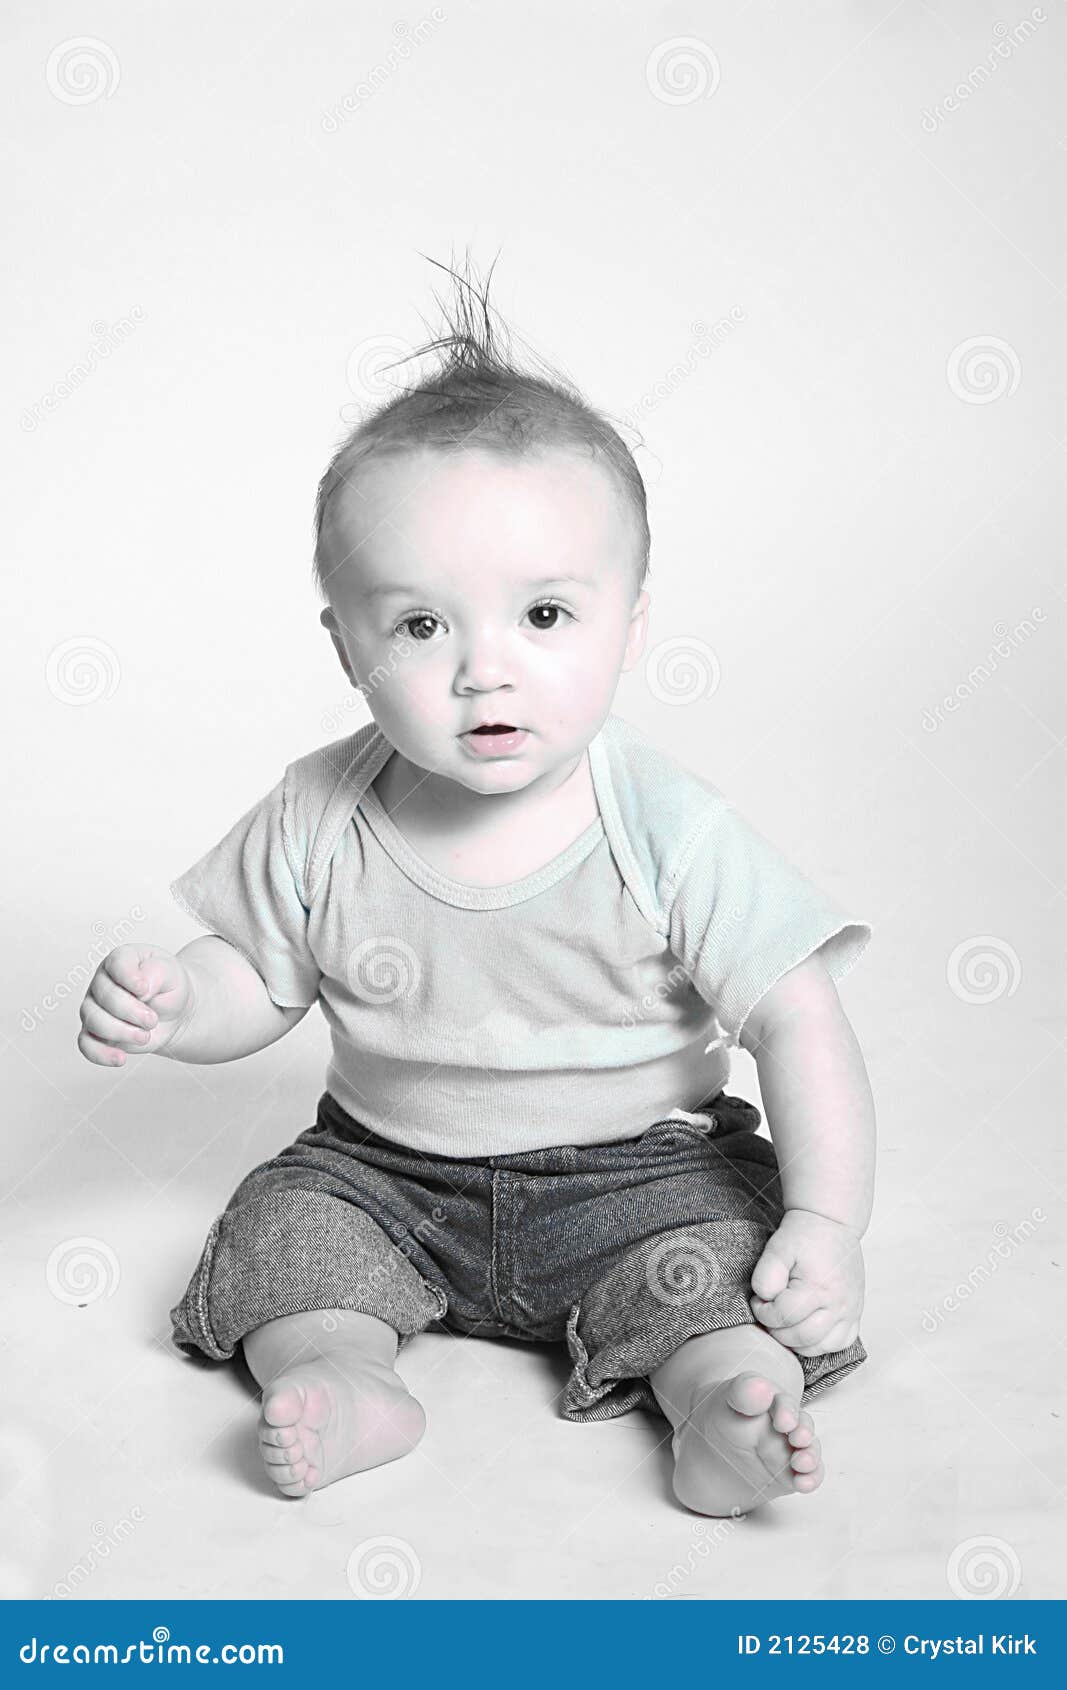 desaturated baby photo